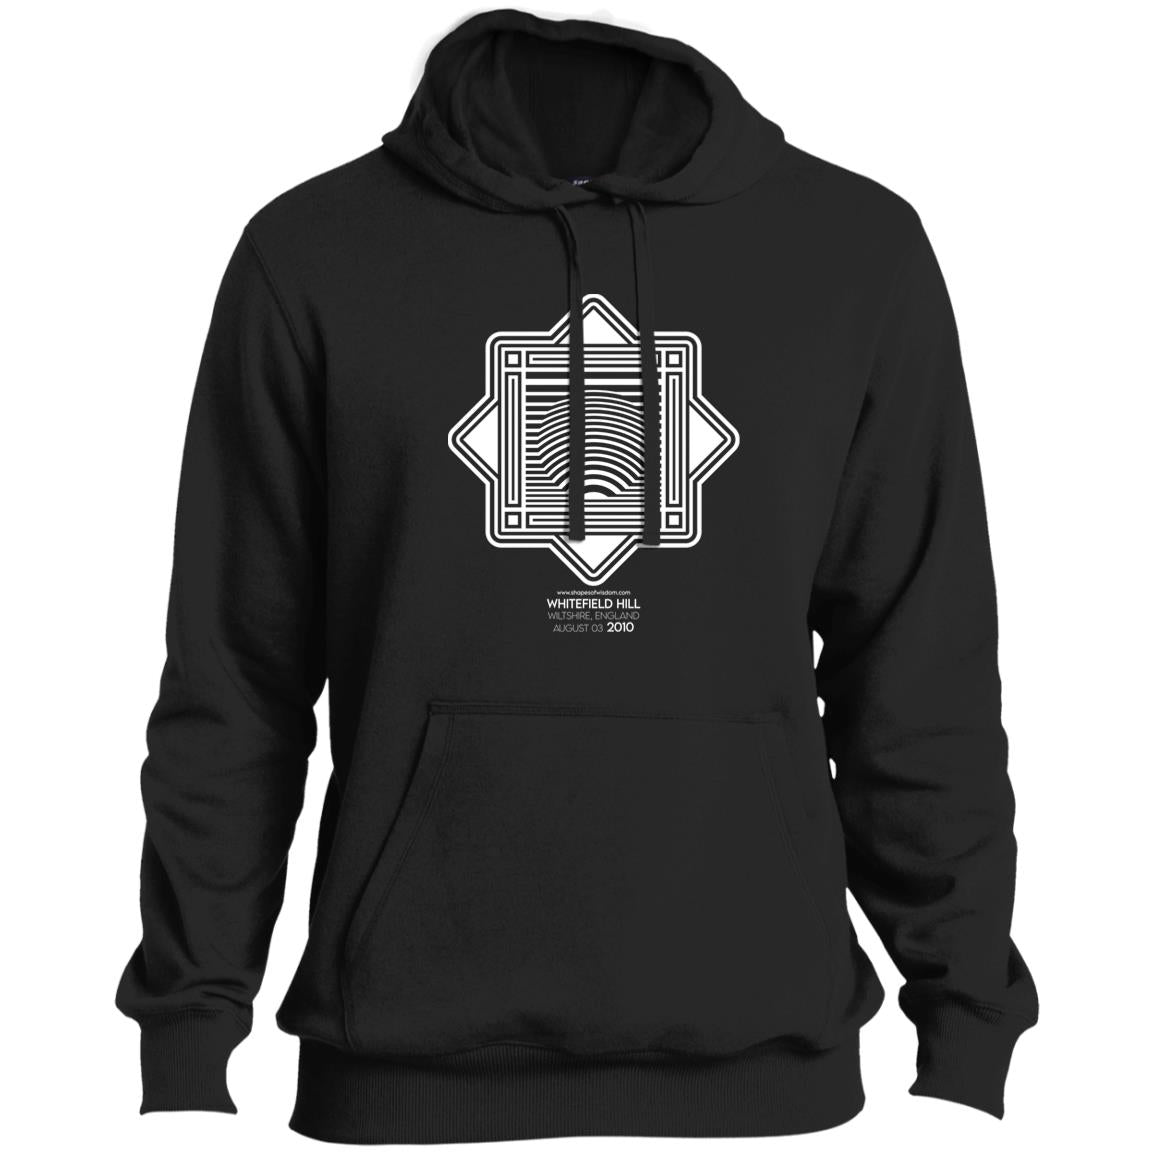 Crop Circle Pullover Hoodie - Whitefield Hill